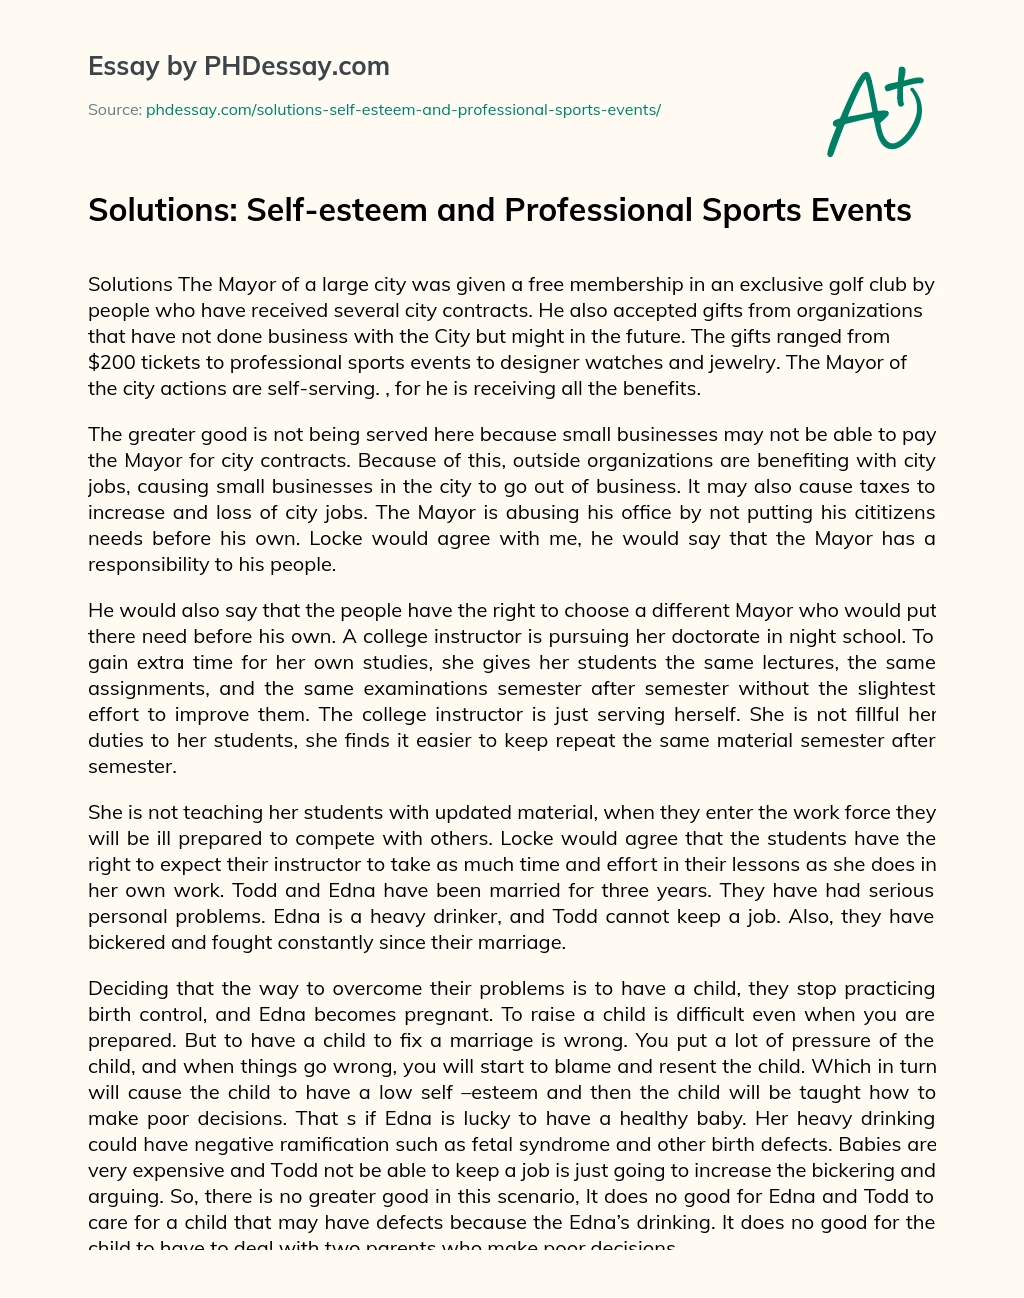 Solutions: Self-esteem and Professional Sports Events essay